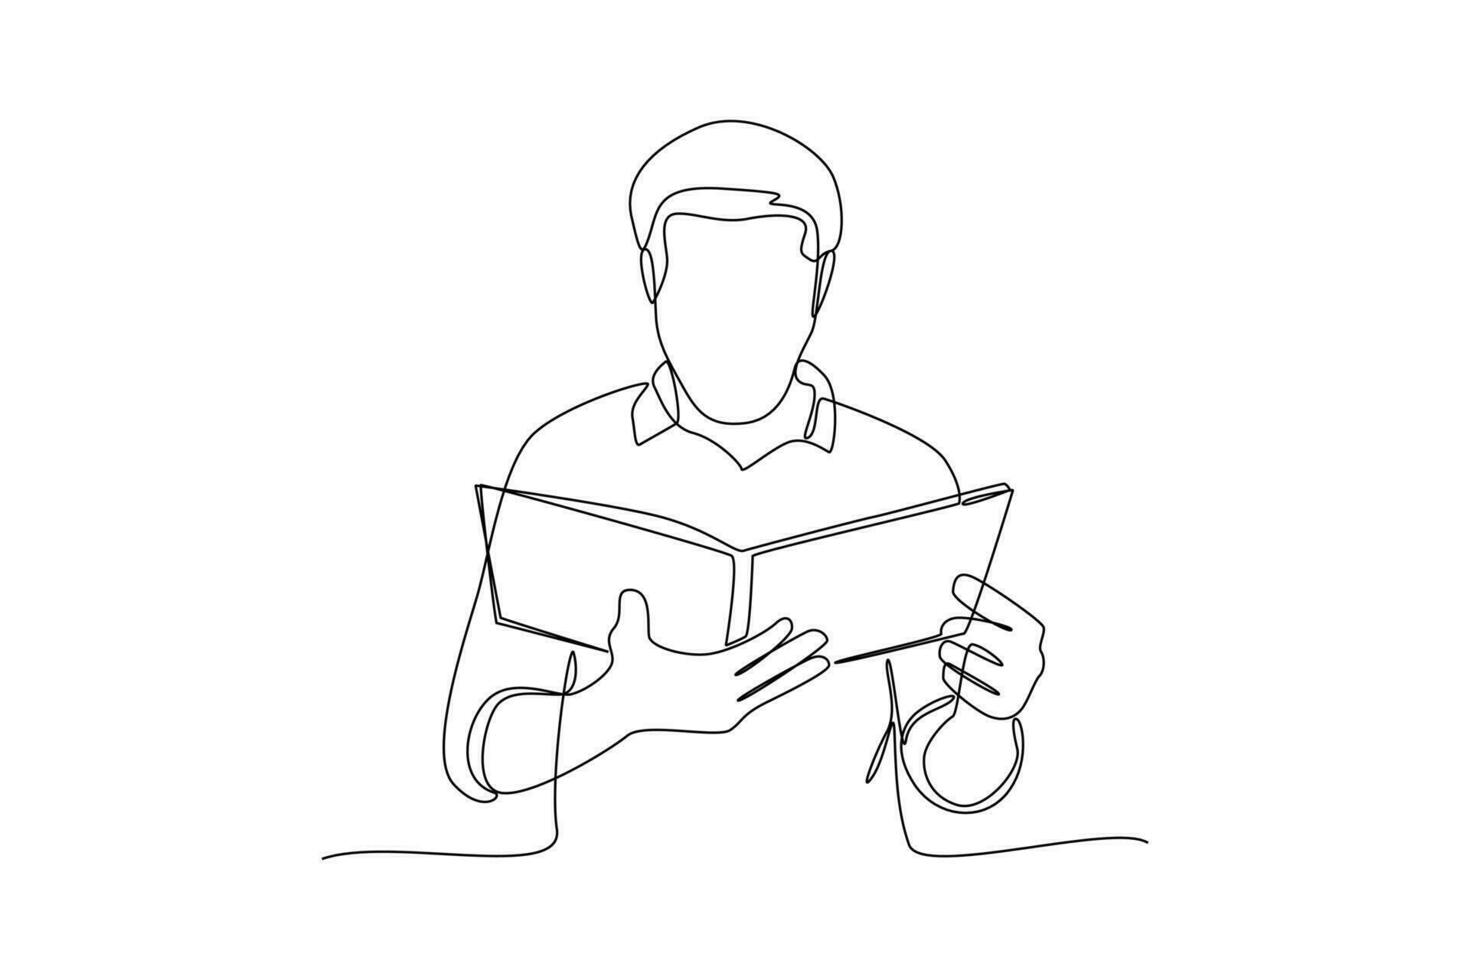 Continuous one-line drawing boy focused on reading book. Book concept. Single line drawing design graphic vector illustration